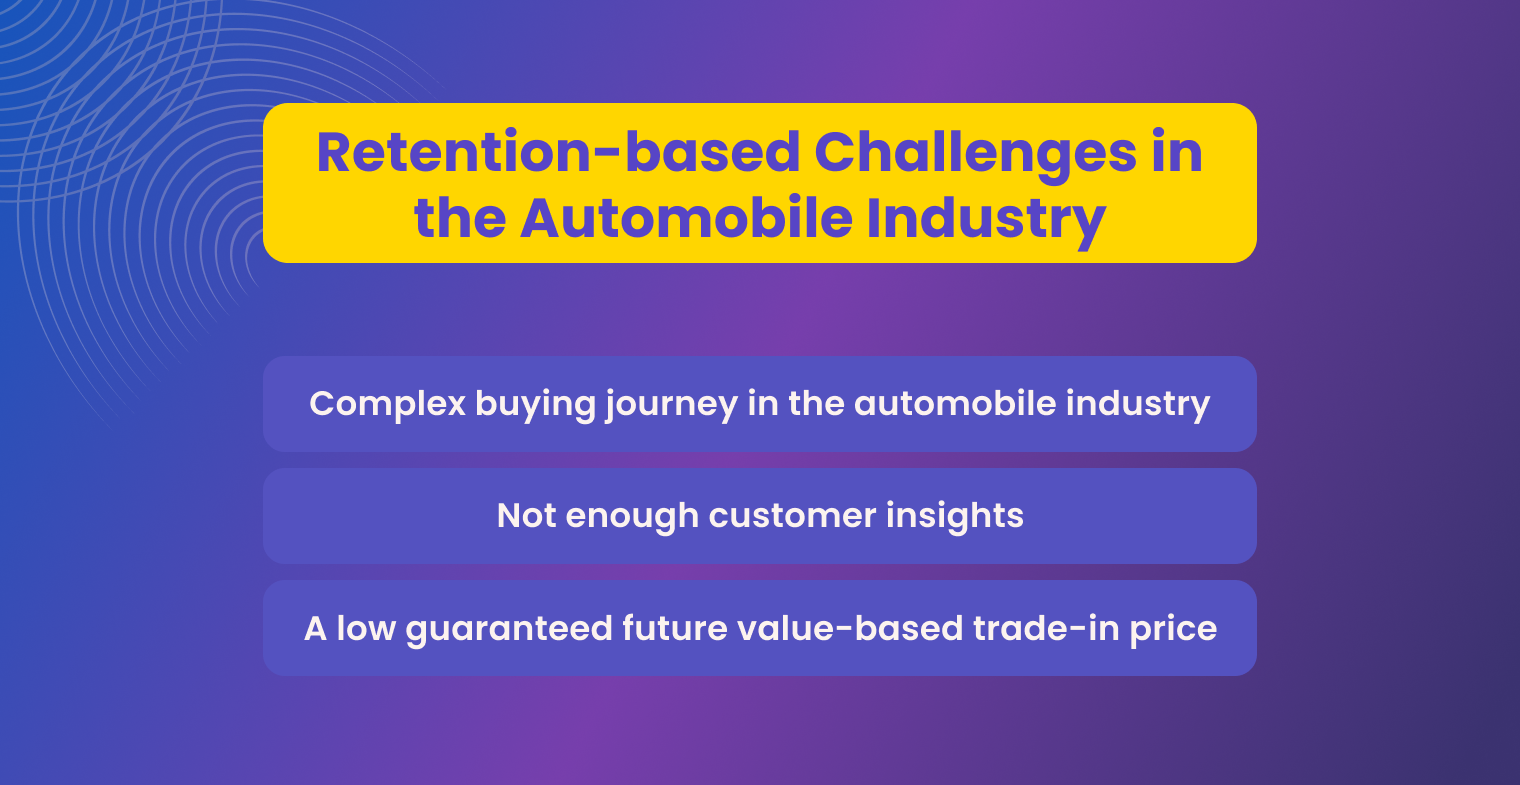 Few Challenges in Automobile Industry in retaining customers